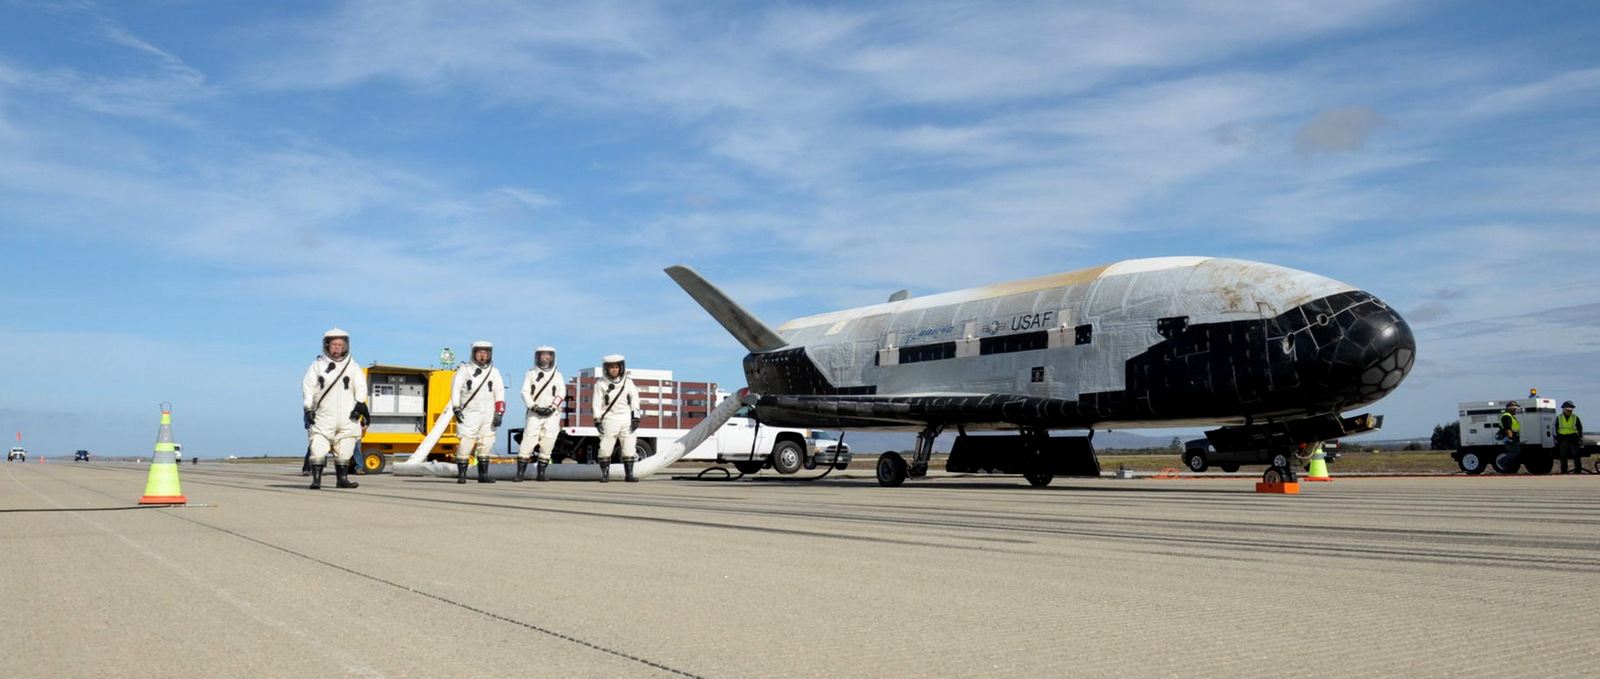 One of the U.S. Air Force's robotic X-37B space planes is seen on the runway after landing itself following a classified mission.